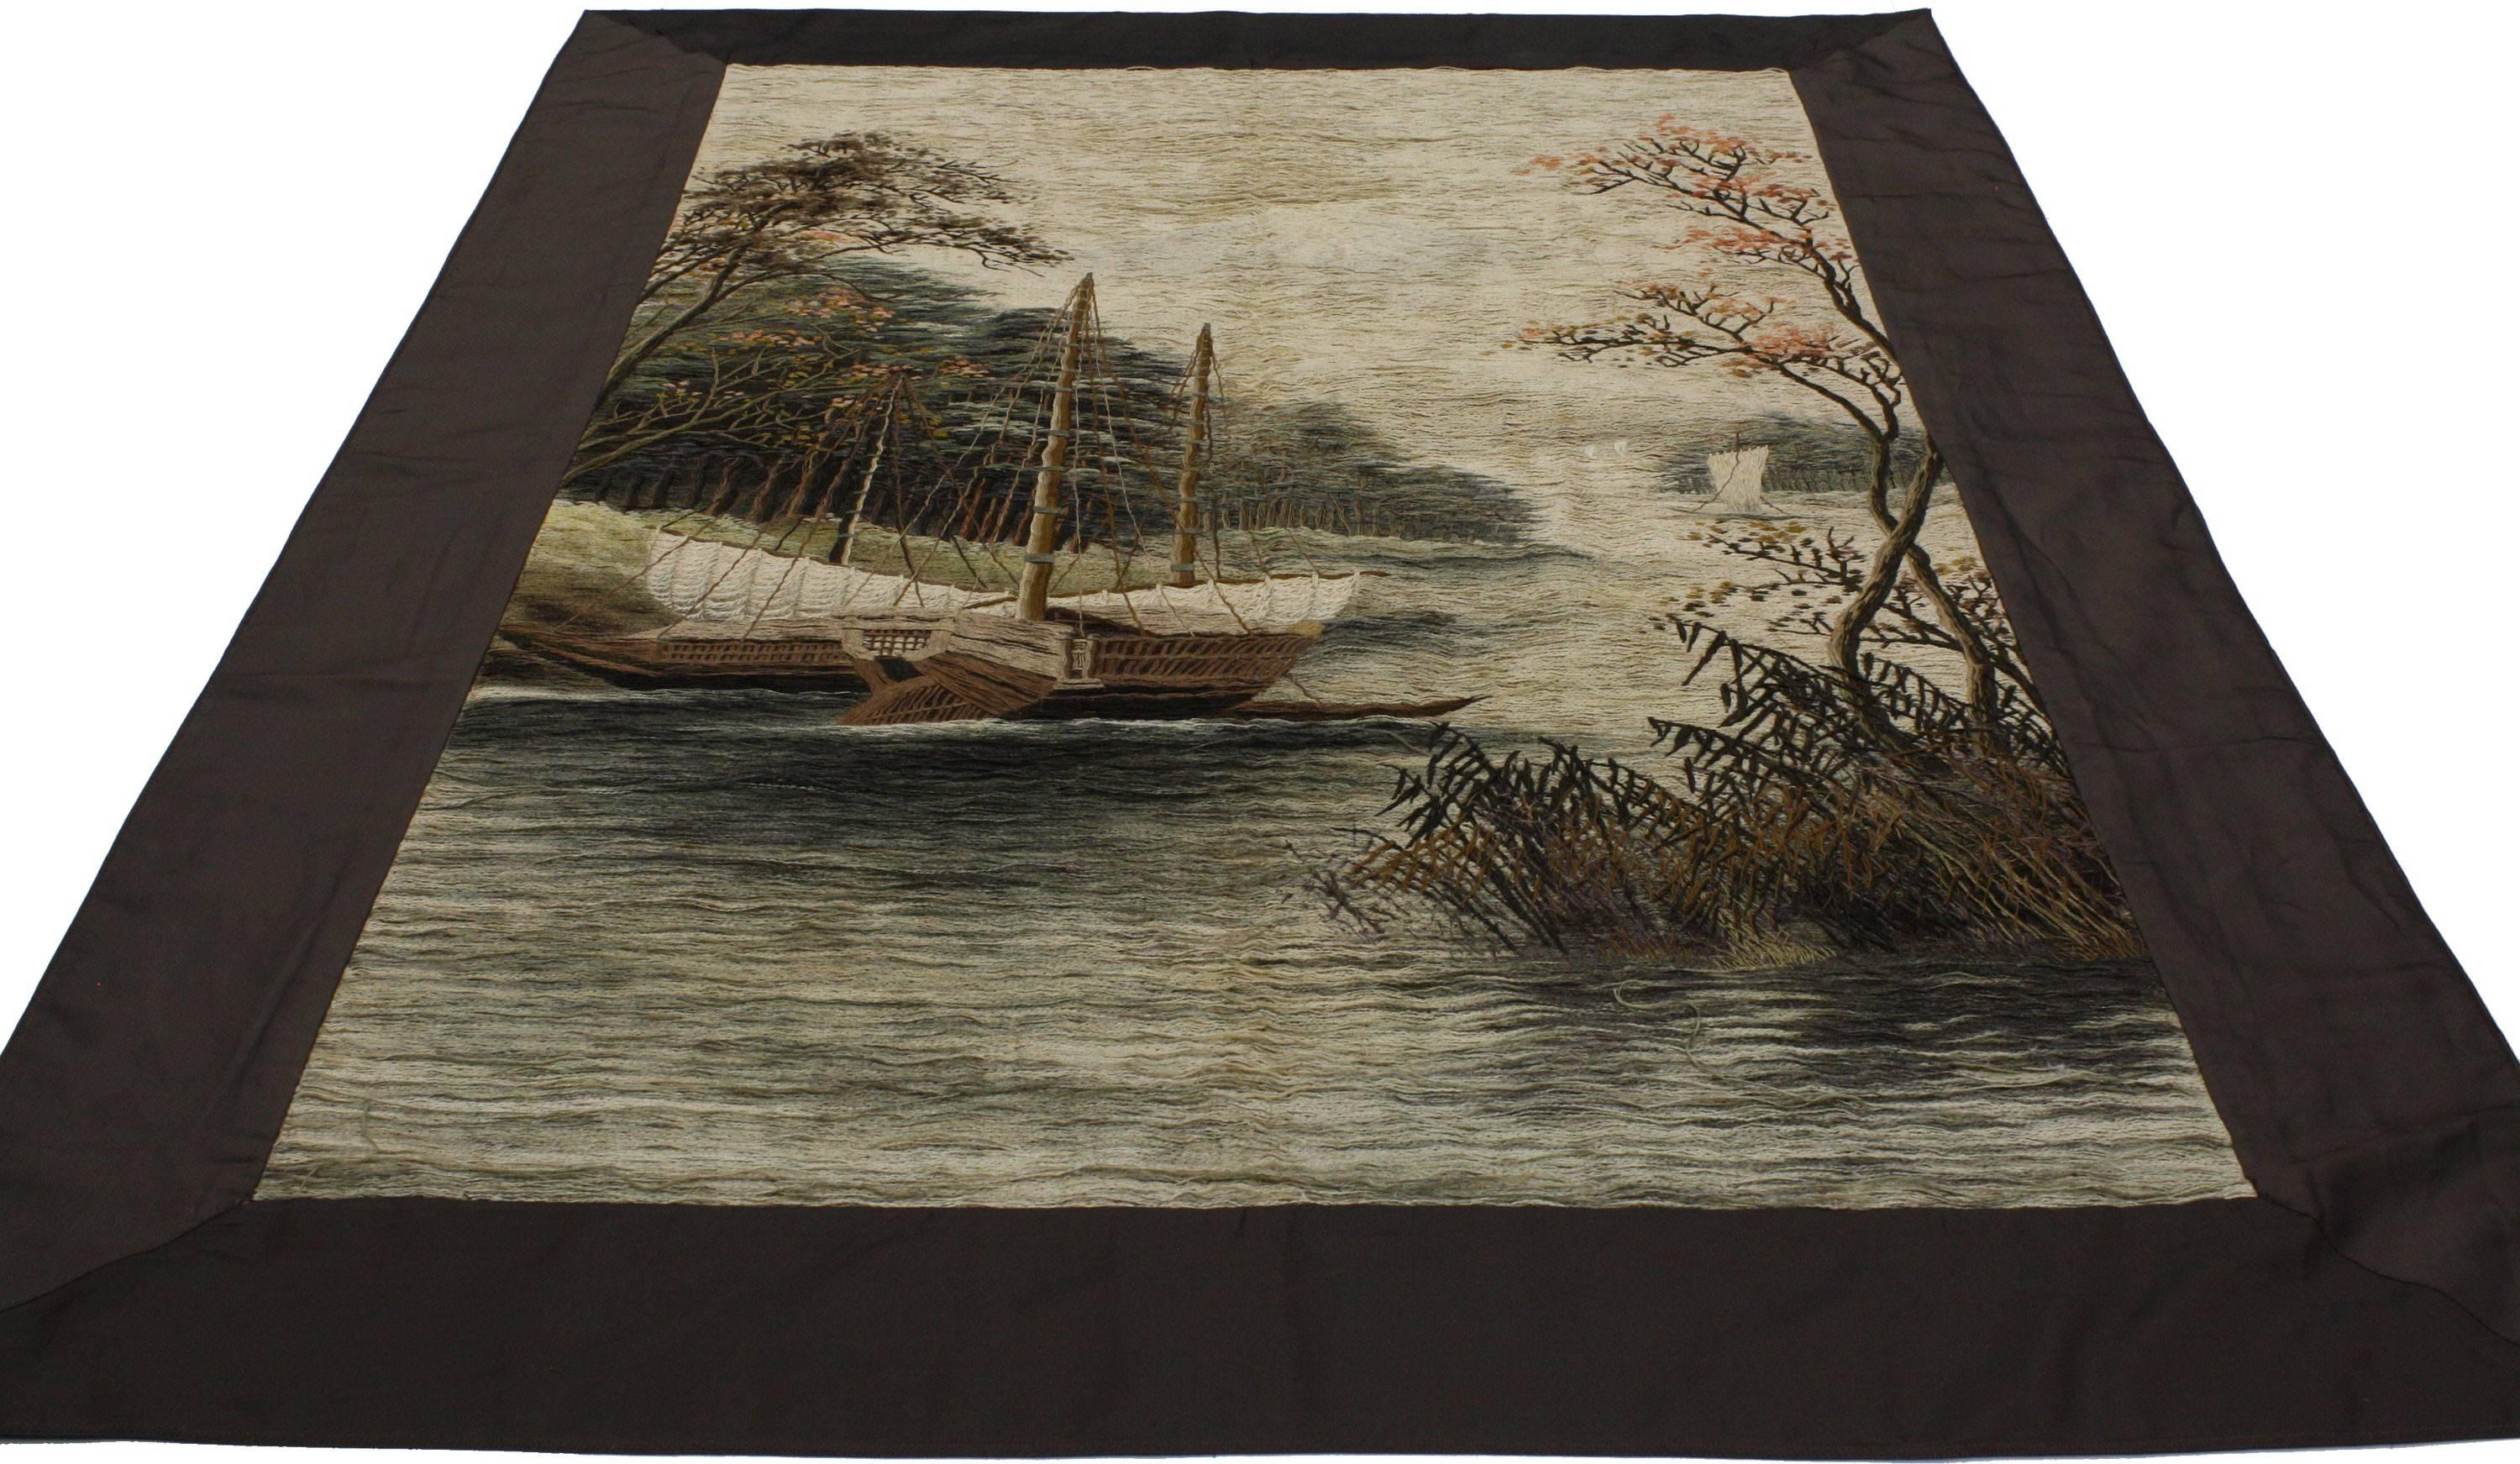 71052, antique Chinese silk embroidered tapestry. This handwoven silk antique Chinese embroidered tapestry features a soothing nautical scene. River waters pour gently into the foreground while three small boats are docked along the banks. What